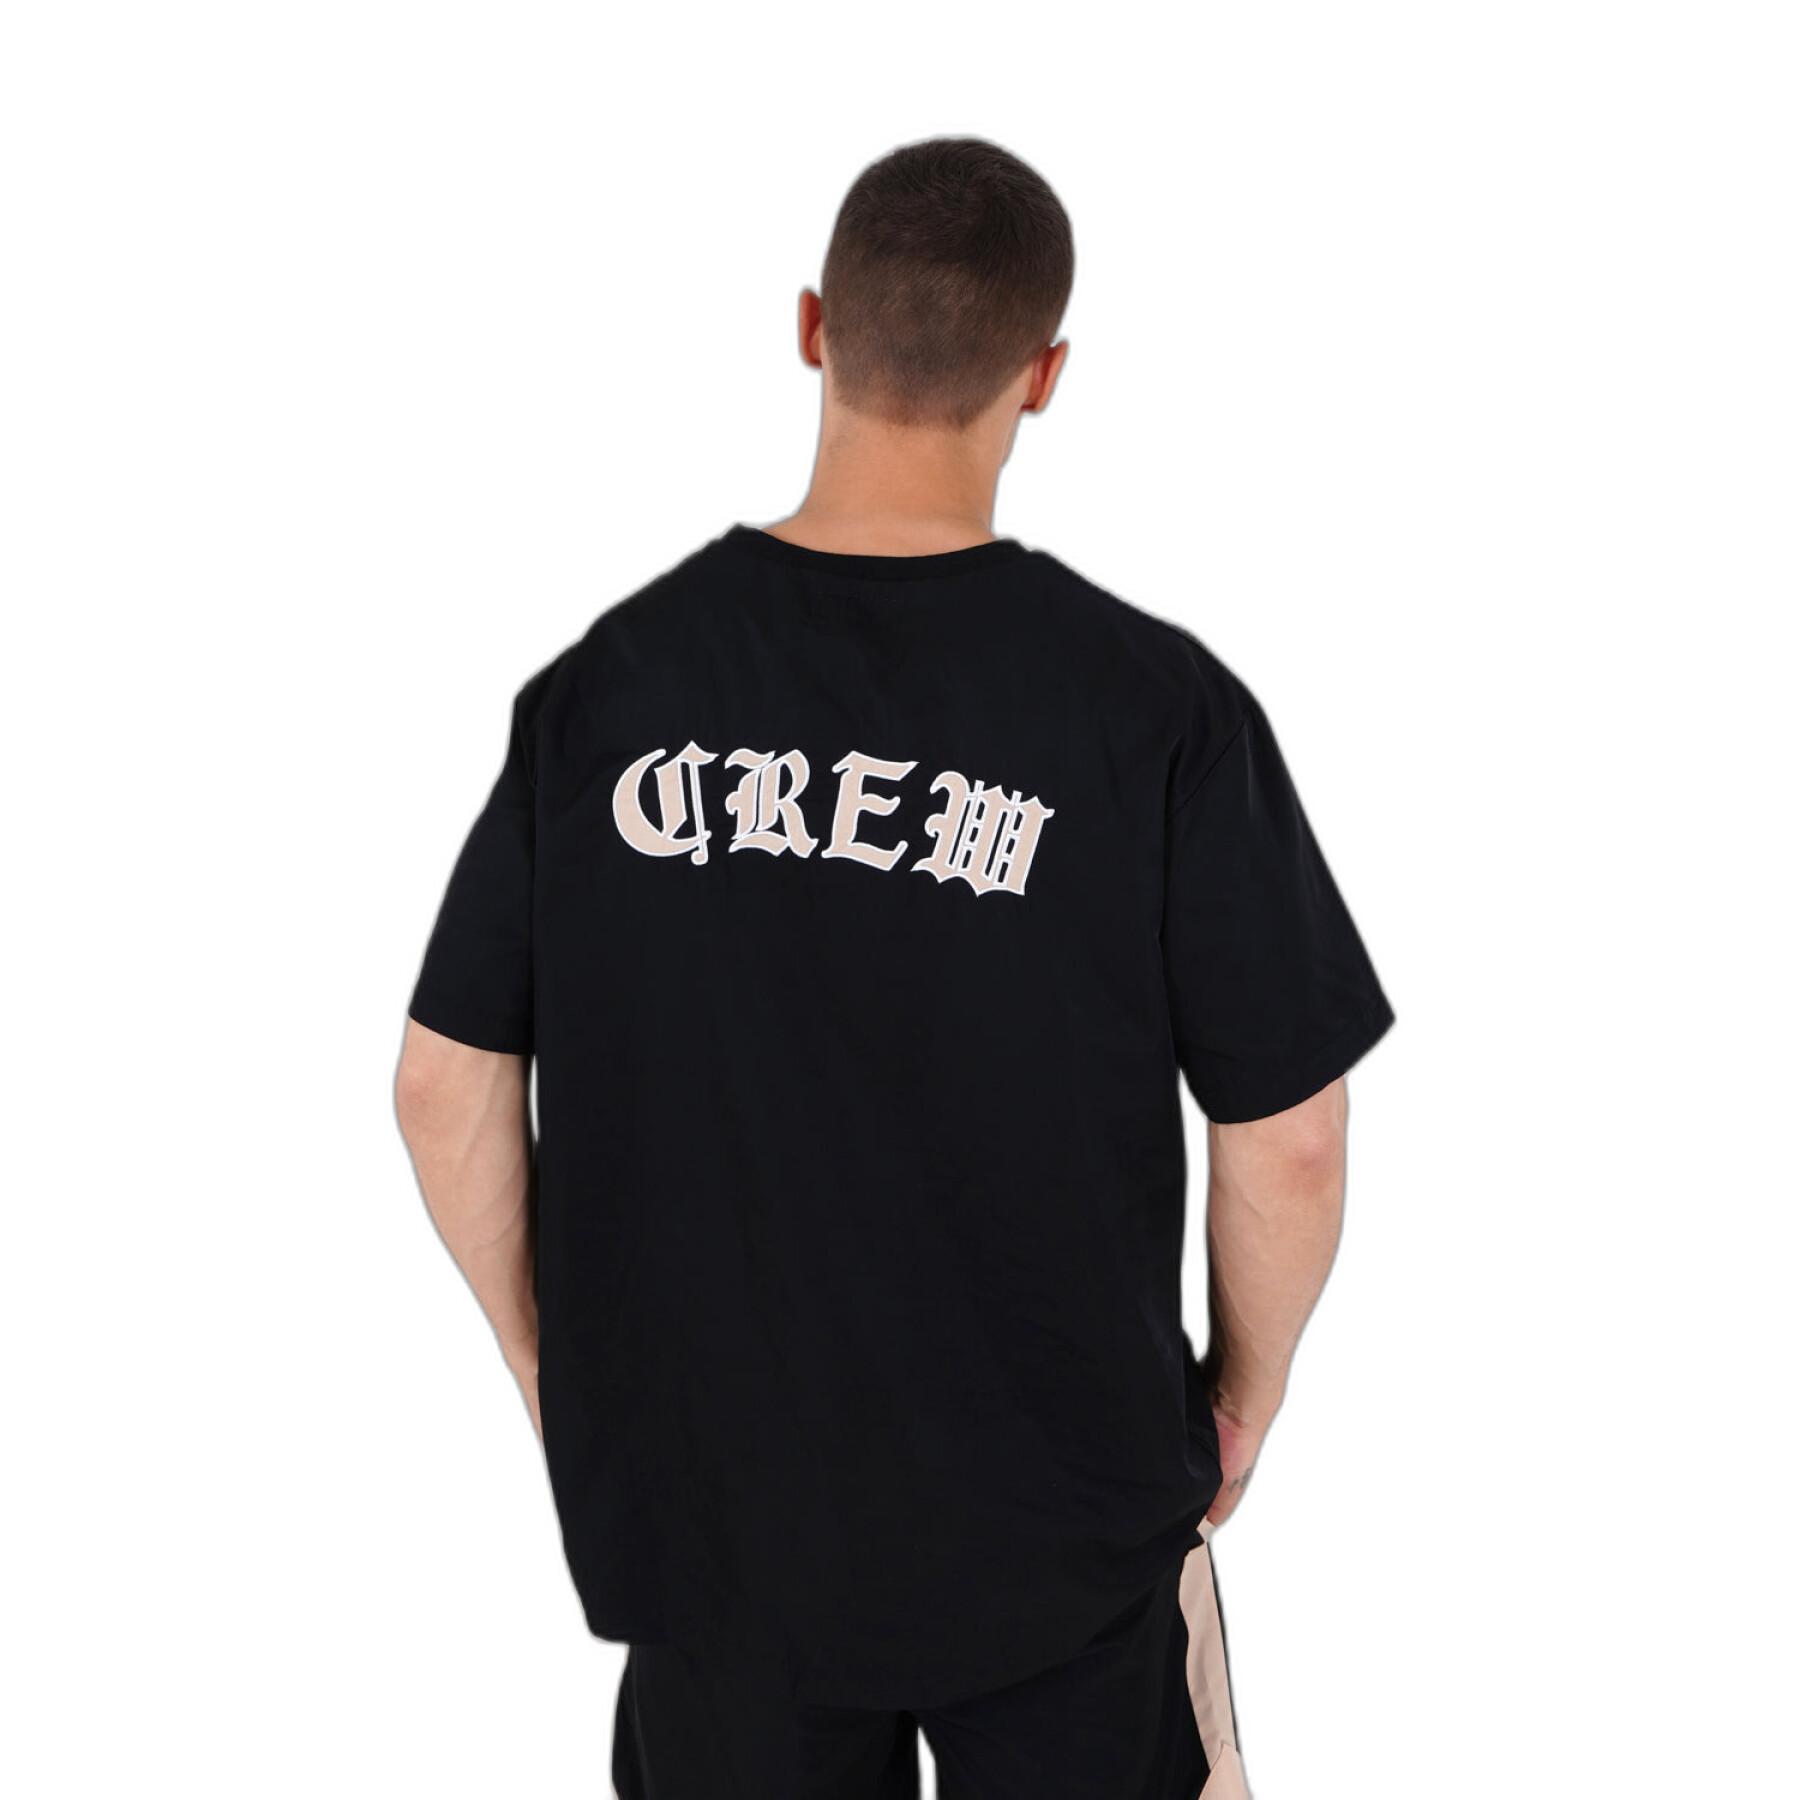 T-shirt Oversized Sixth June Gothic Letters